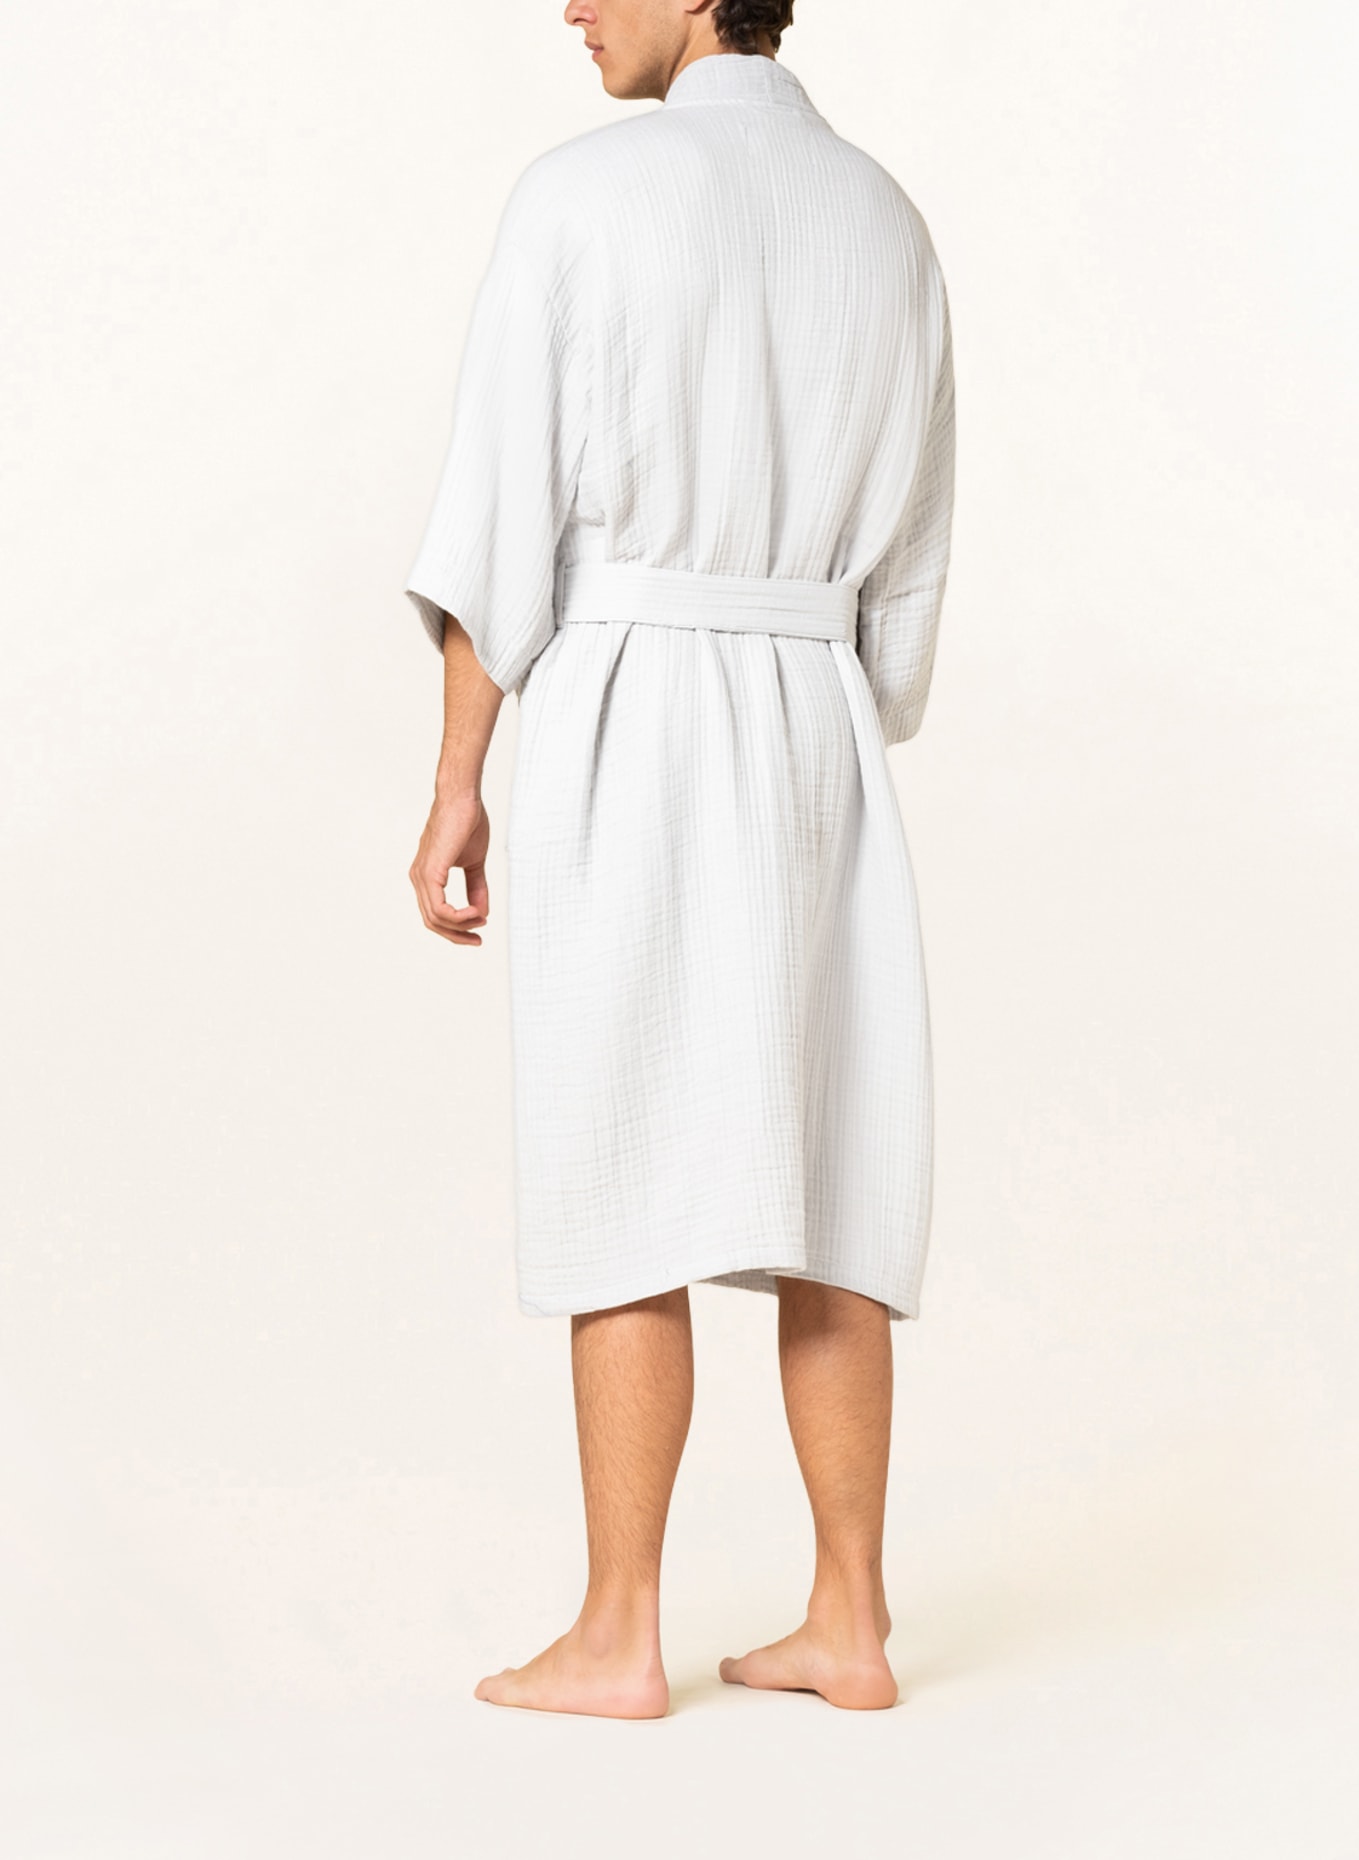 HAY Unisex bathrobe with 3/4 sleeves, Color: LIGHT GRAY (Image 3)